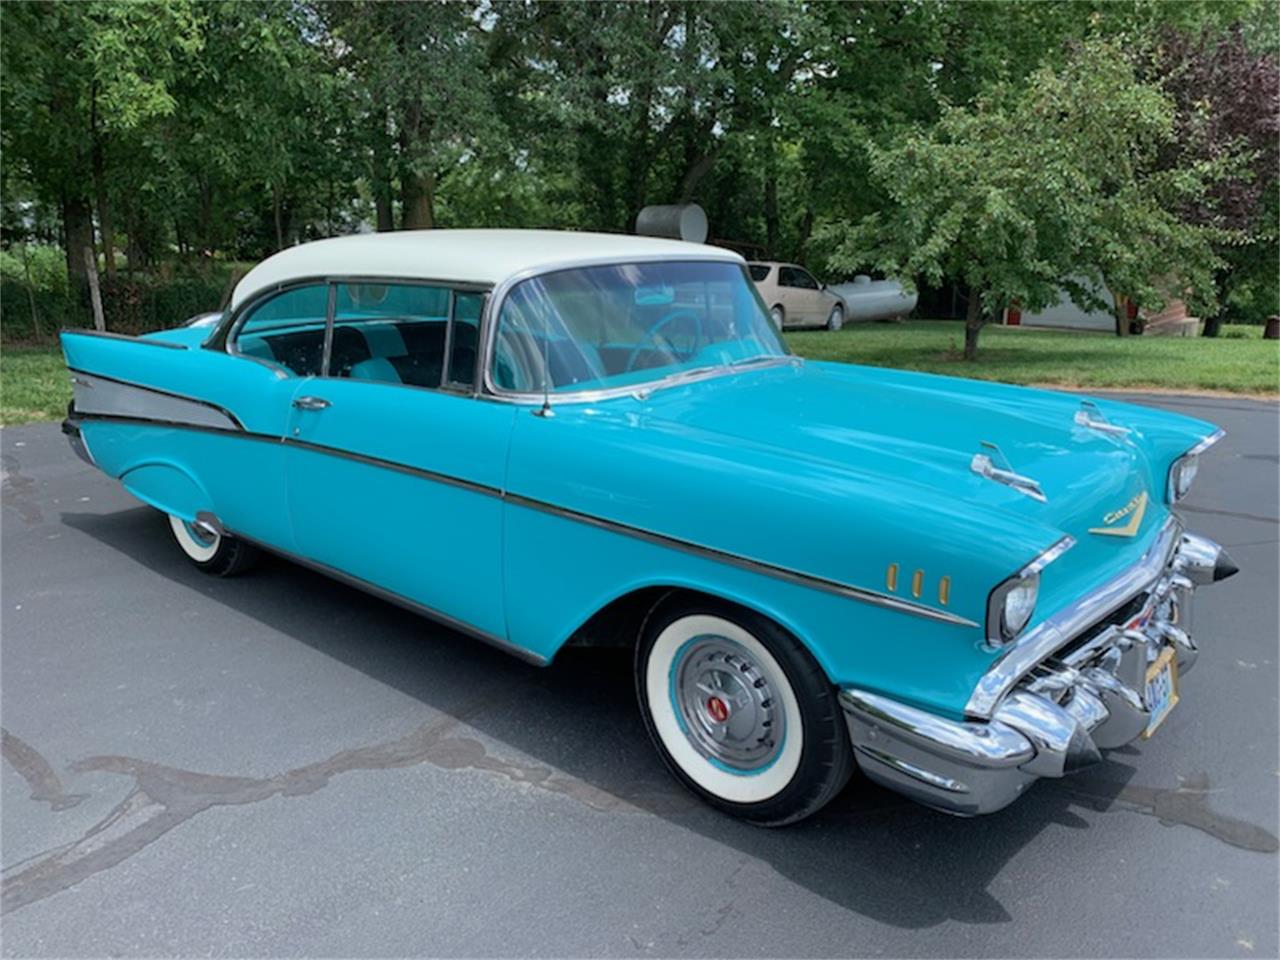 1957 Chevrolet Bel Air for sale in New franklin, Mo., MO